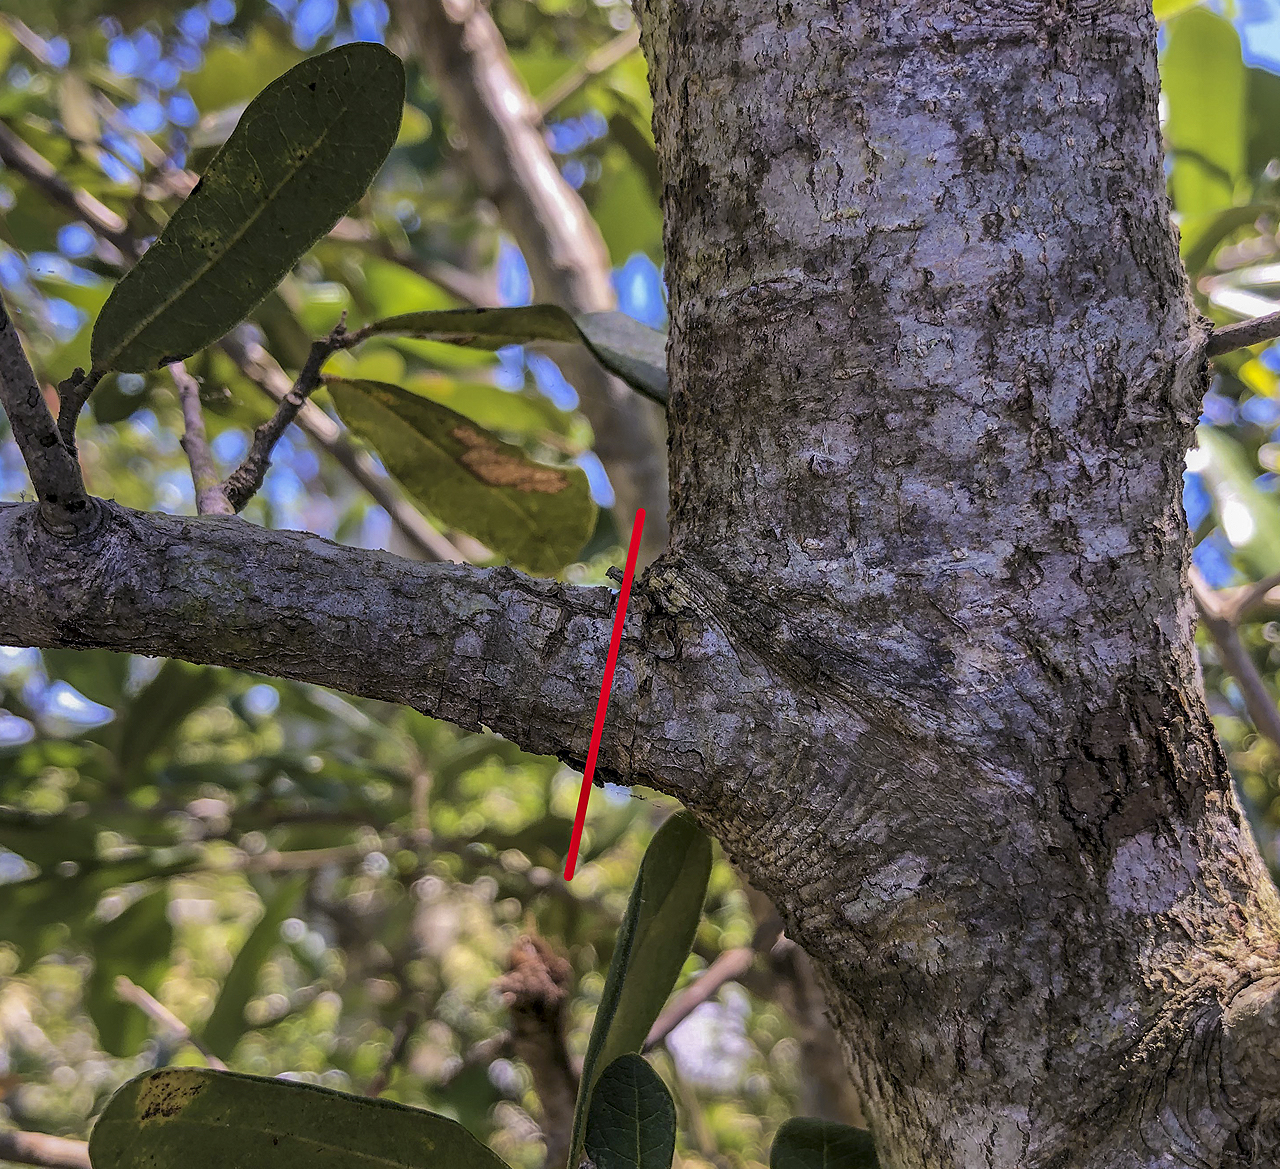 The red line shows where the pruning cut should  be made on this yaupon holly, just outside the branch collar.